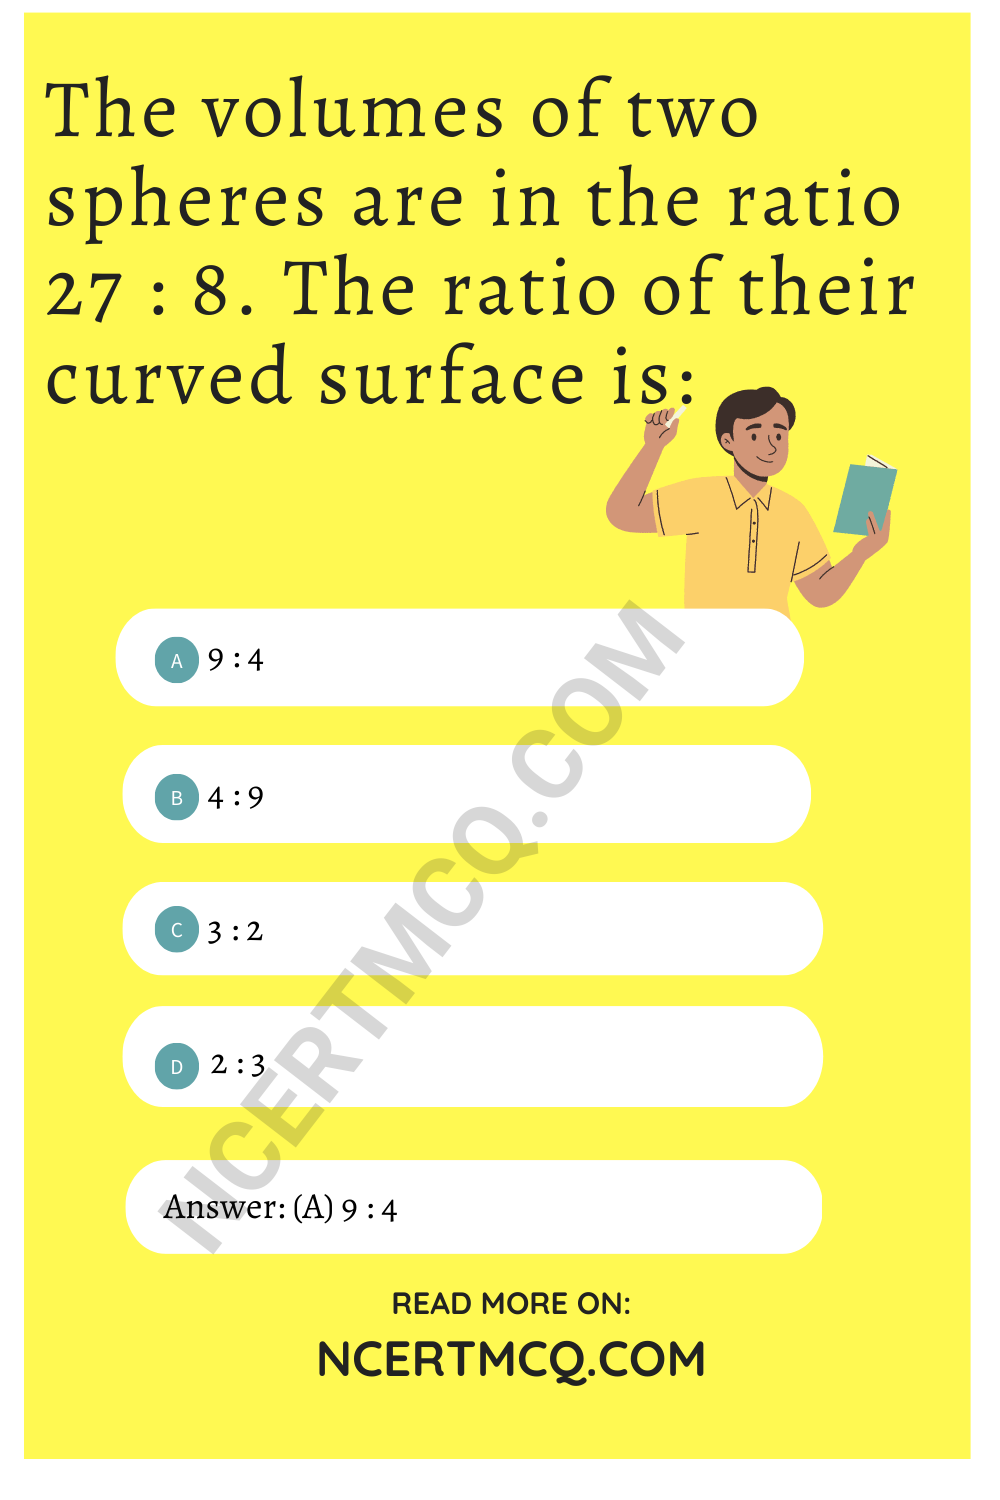 The volumes of two spheres are in the ratio 27 : 8. The ratio of their curved surface is: